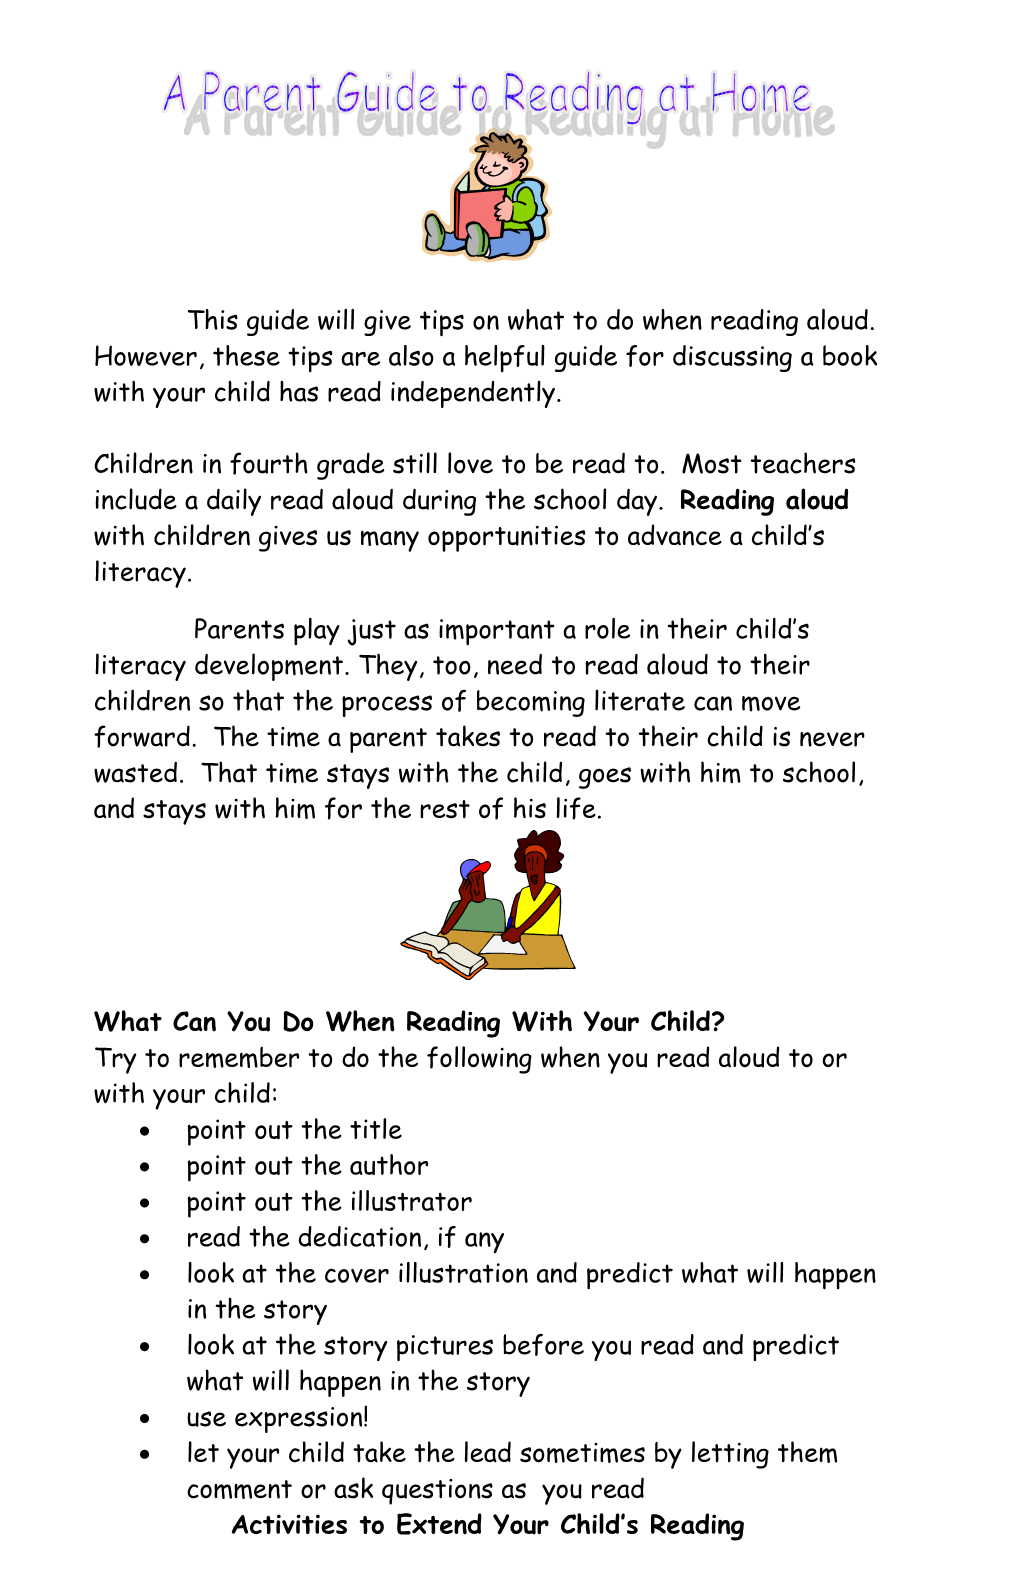 What Can You Do When Reading with Your Child?